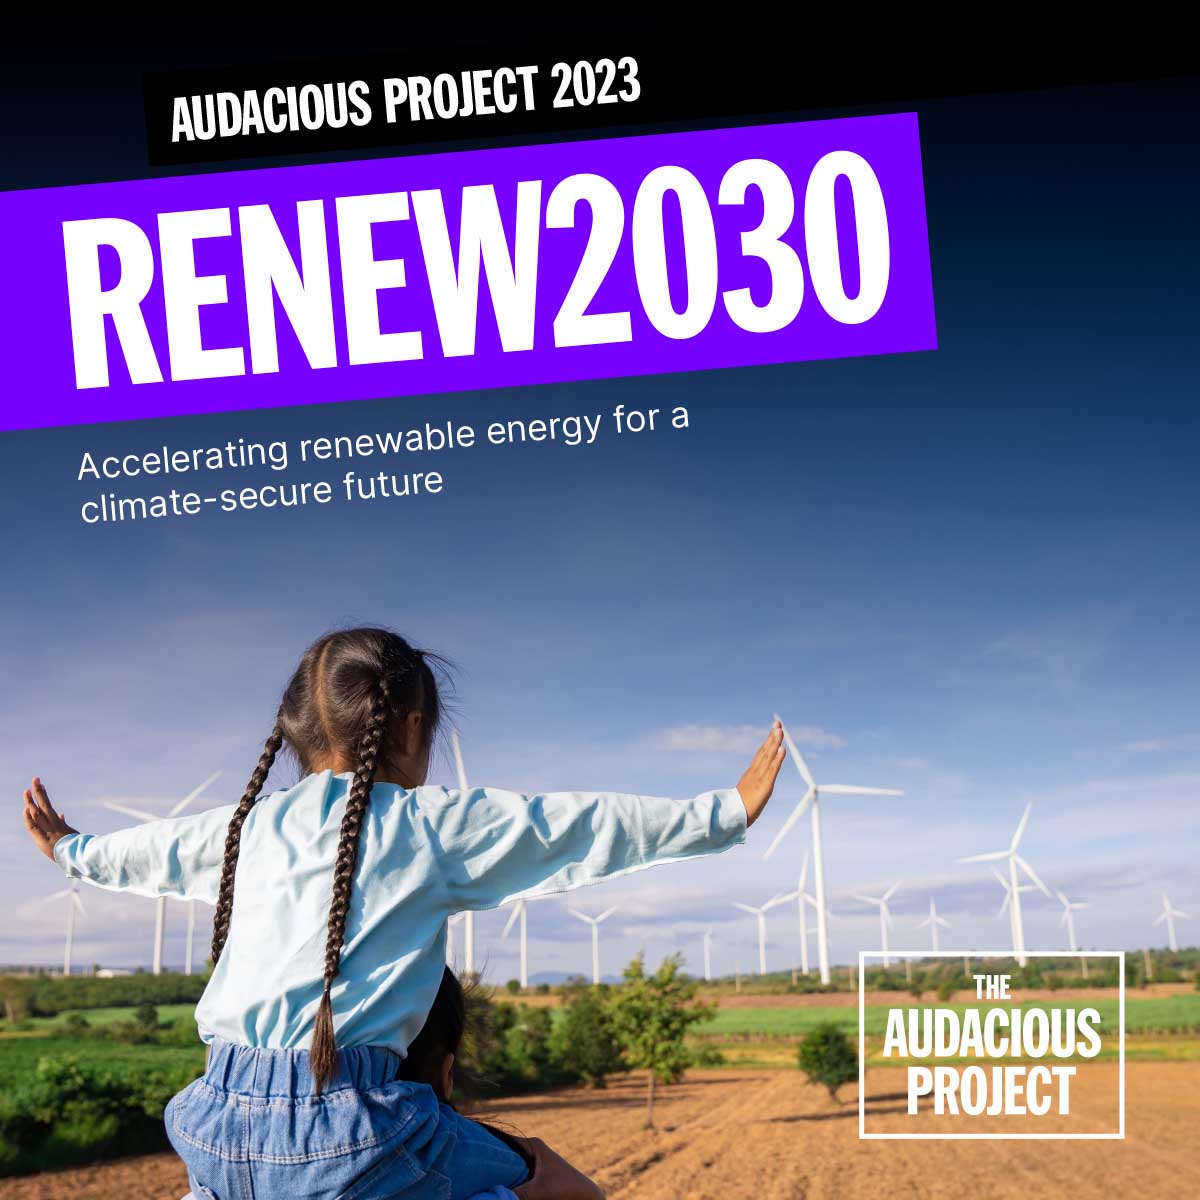 Renew2030 is a @TEDTalks' @TheAudaciousProject 2023 grantee & we're proud to support them. 🍃

Renew2030 is scaling global wind & solar energy capacity 5x by 2030 to keep the world on track for 1.5 degrees of warming: bit.ly/3A7v1cI
#AudaciousProject #ClimateAction